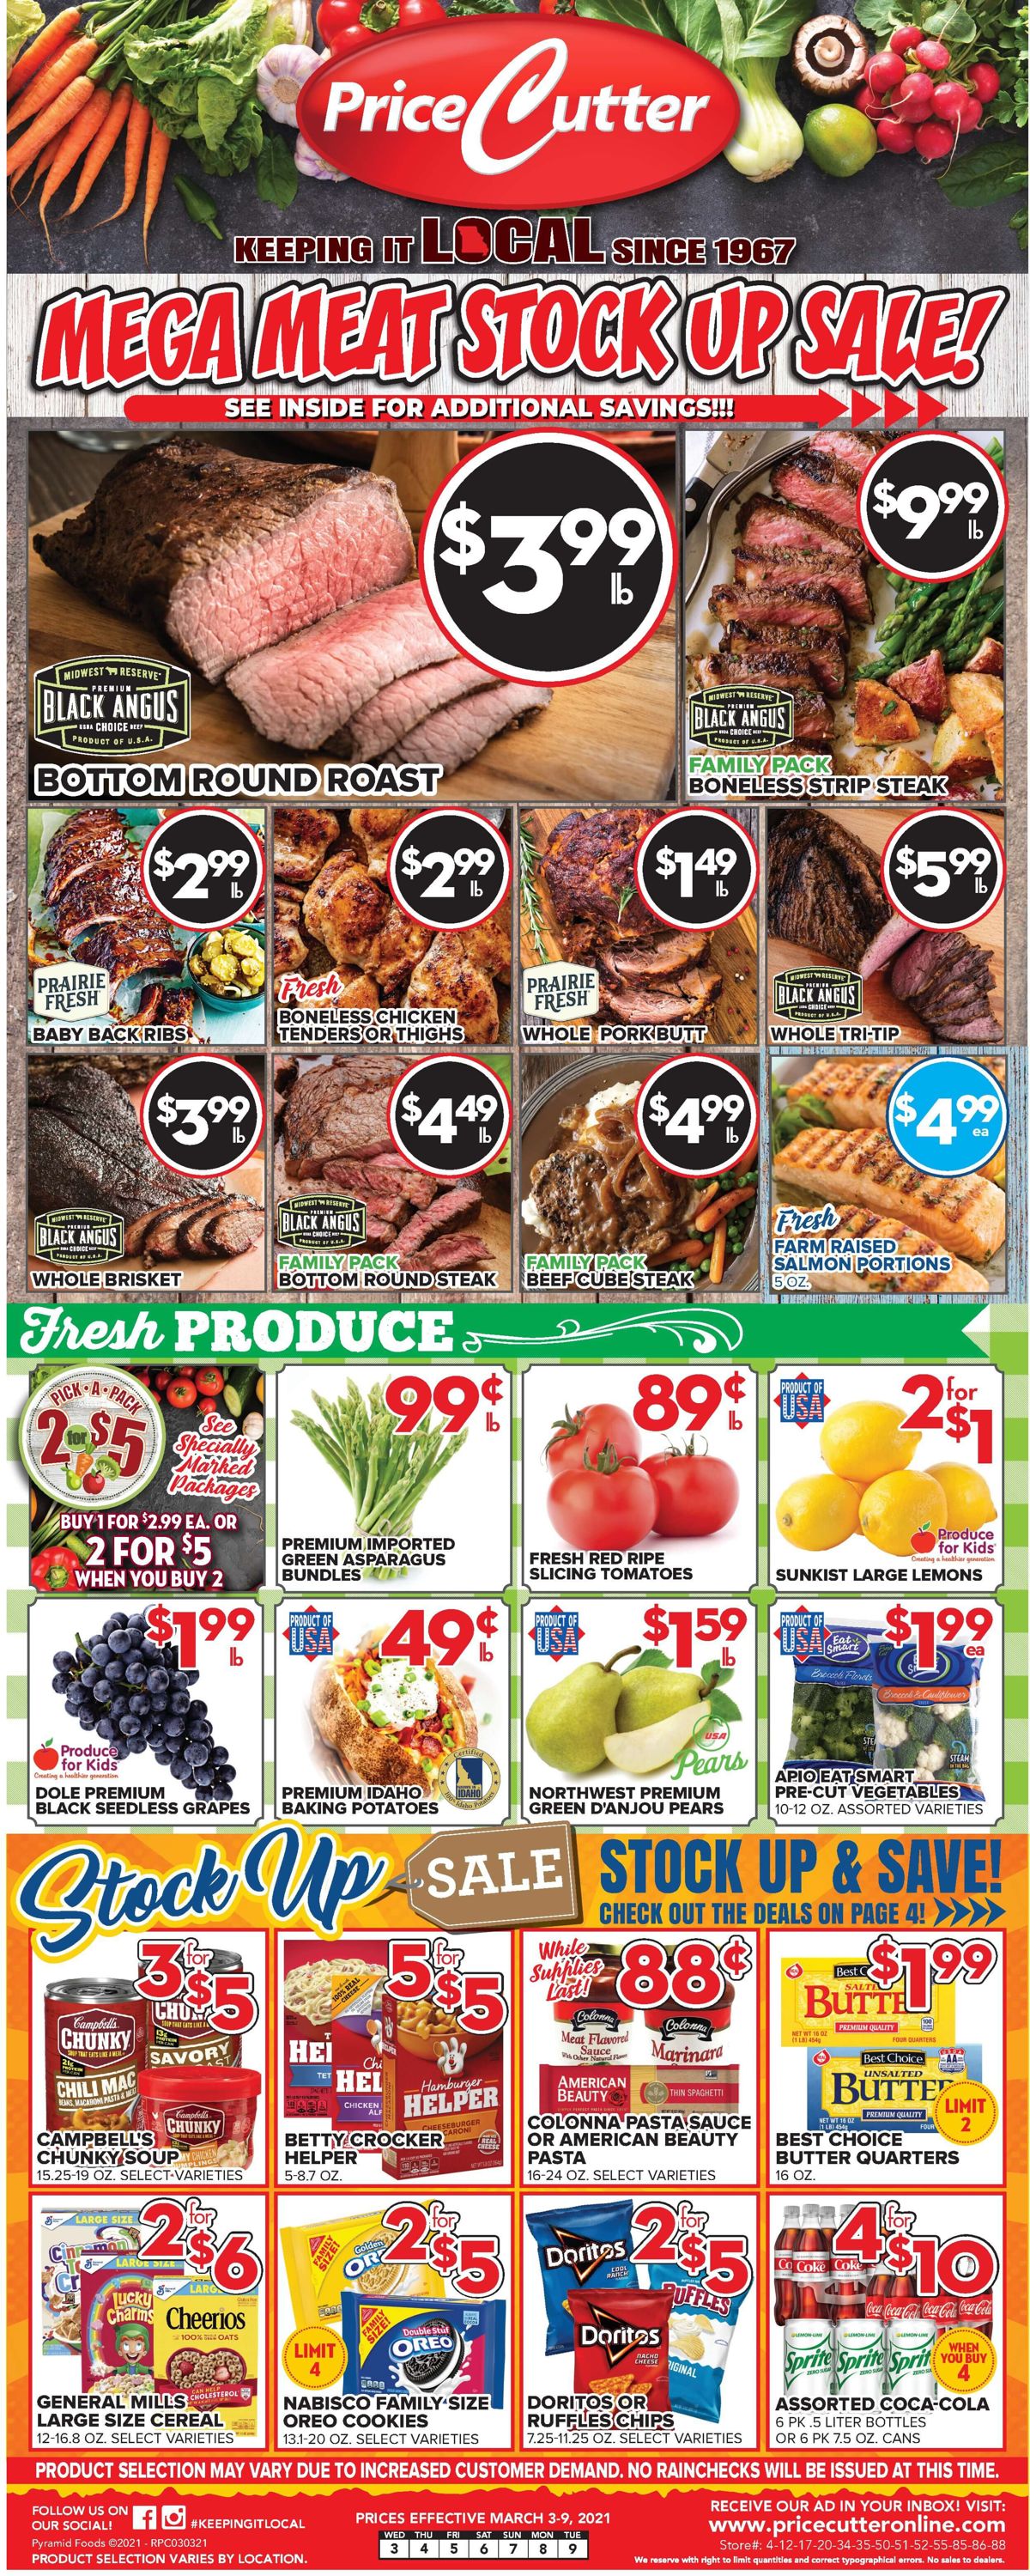 Price Cutter Weekly Ad Circular - valid 03/03-03/09/2021